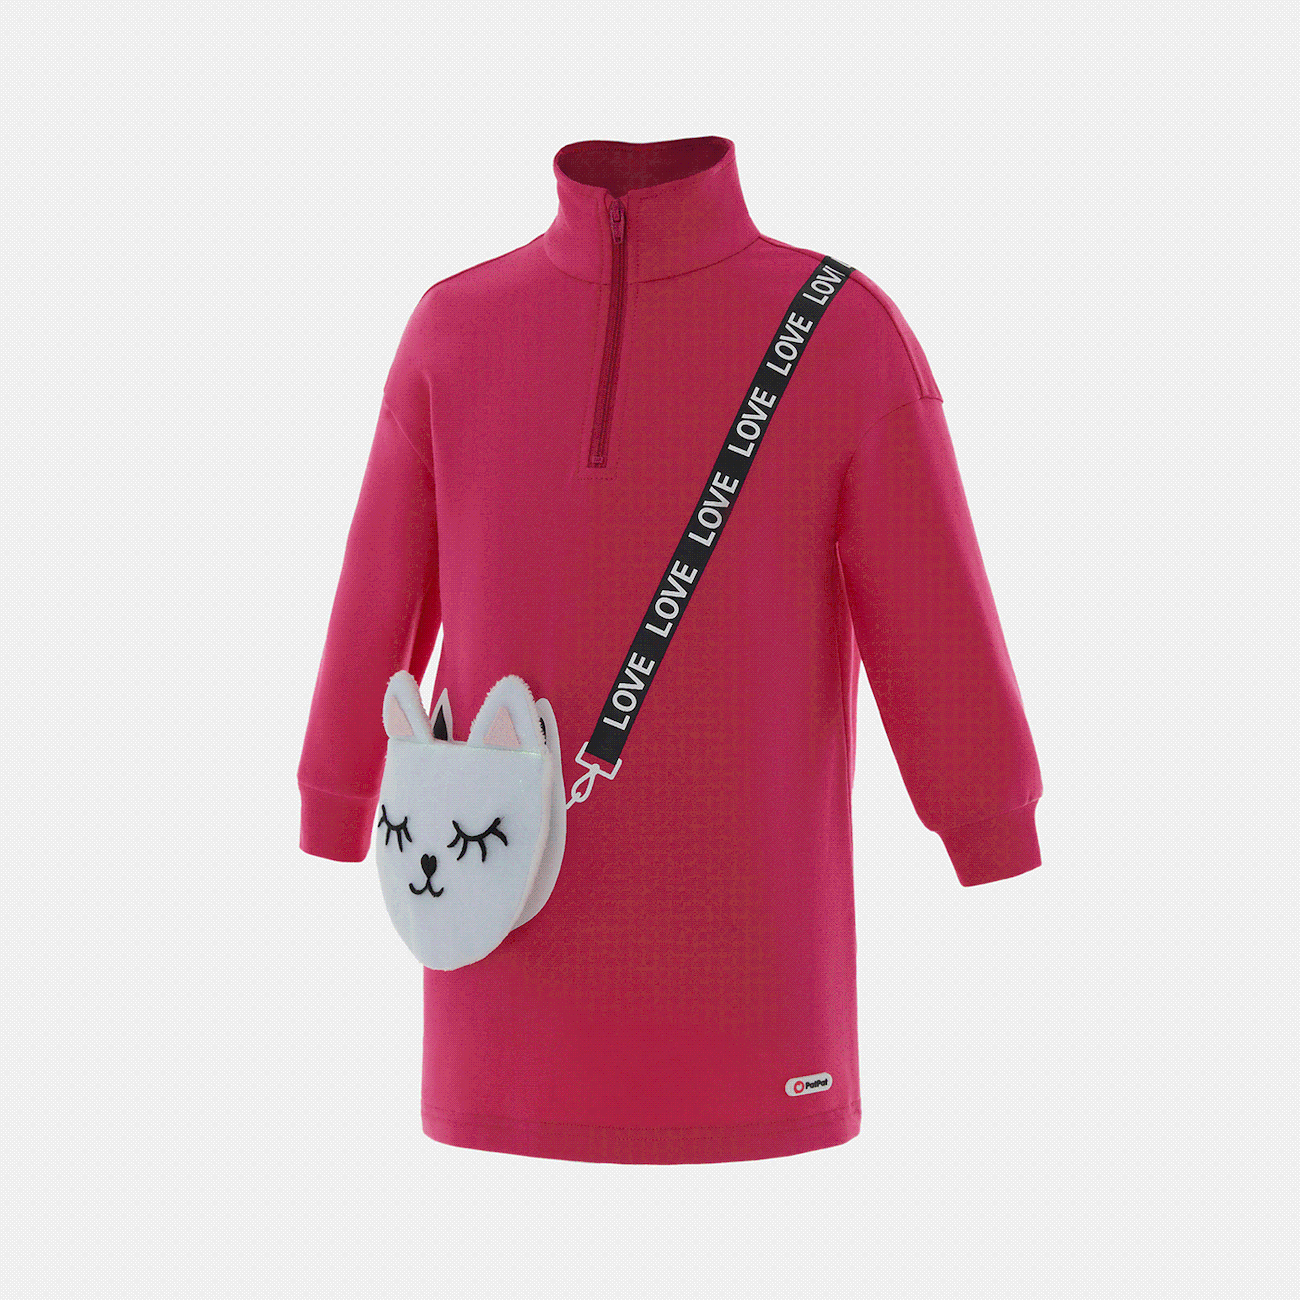 Go-Glow Illuminating Sweatshirt Dress with Light Up Kitty Bag Including Controller (Built-In Battery) Hot Pink big image 1